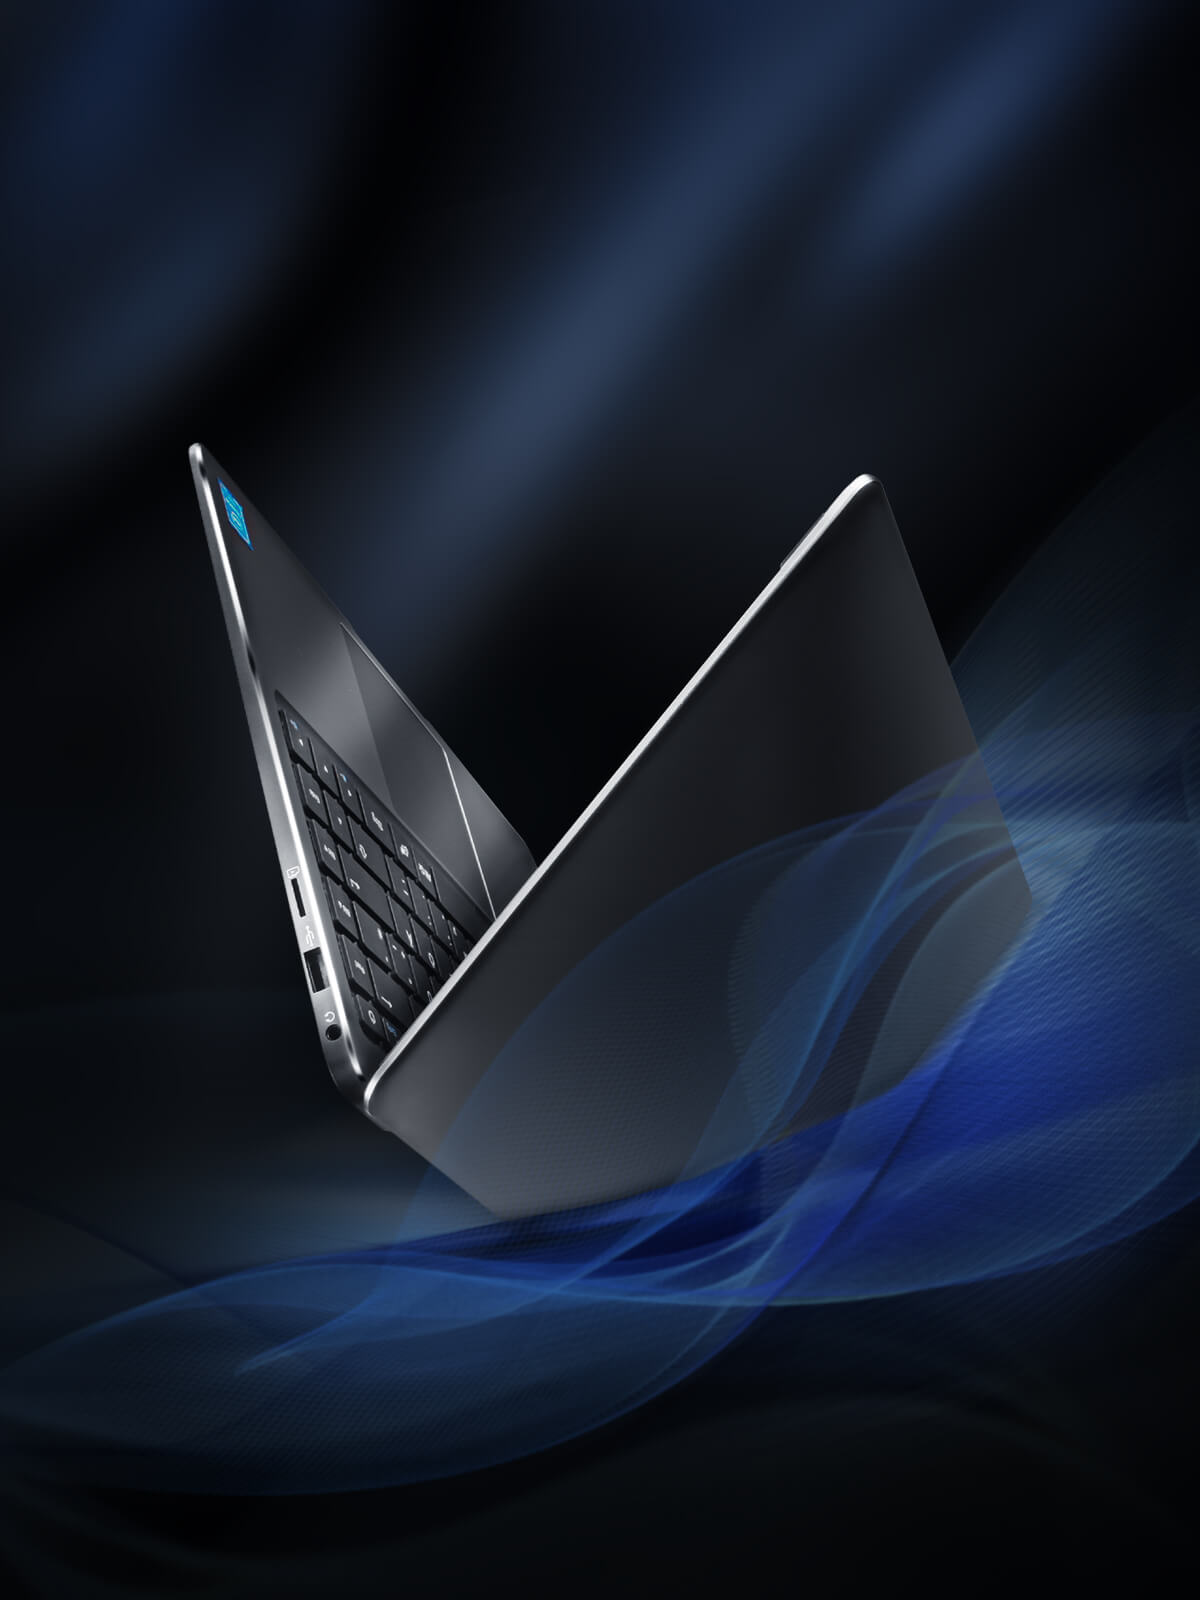 LincPlus P2 laptop with metal body - ultrathin and lightweight laptop